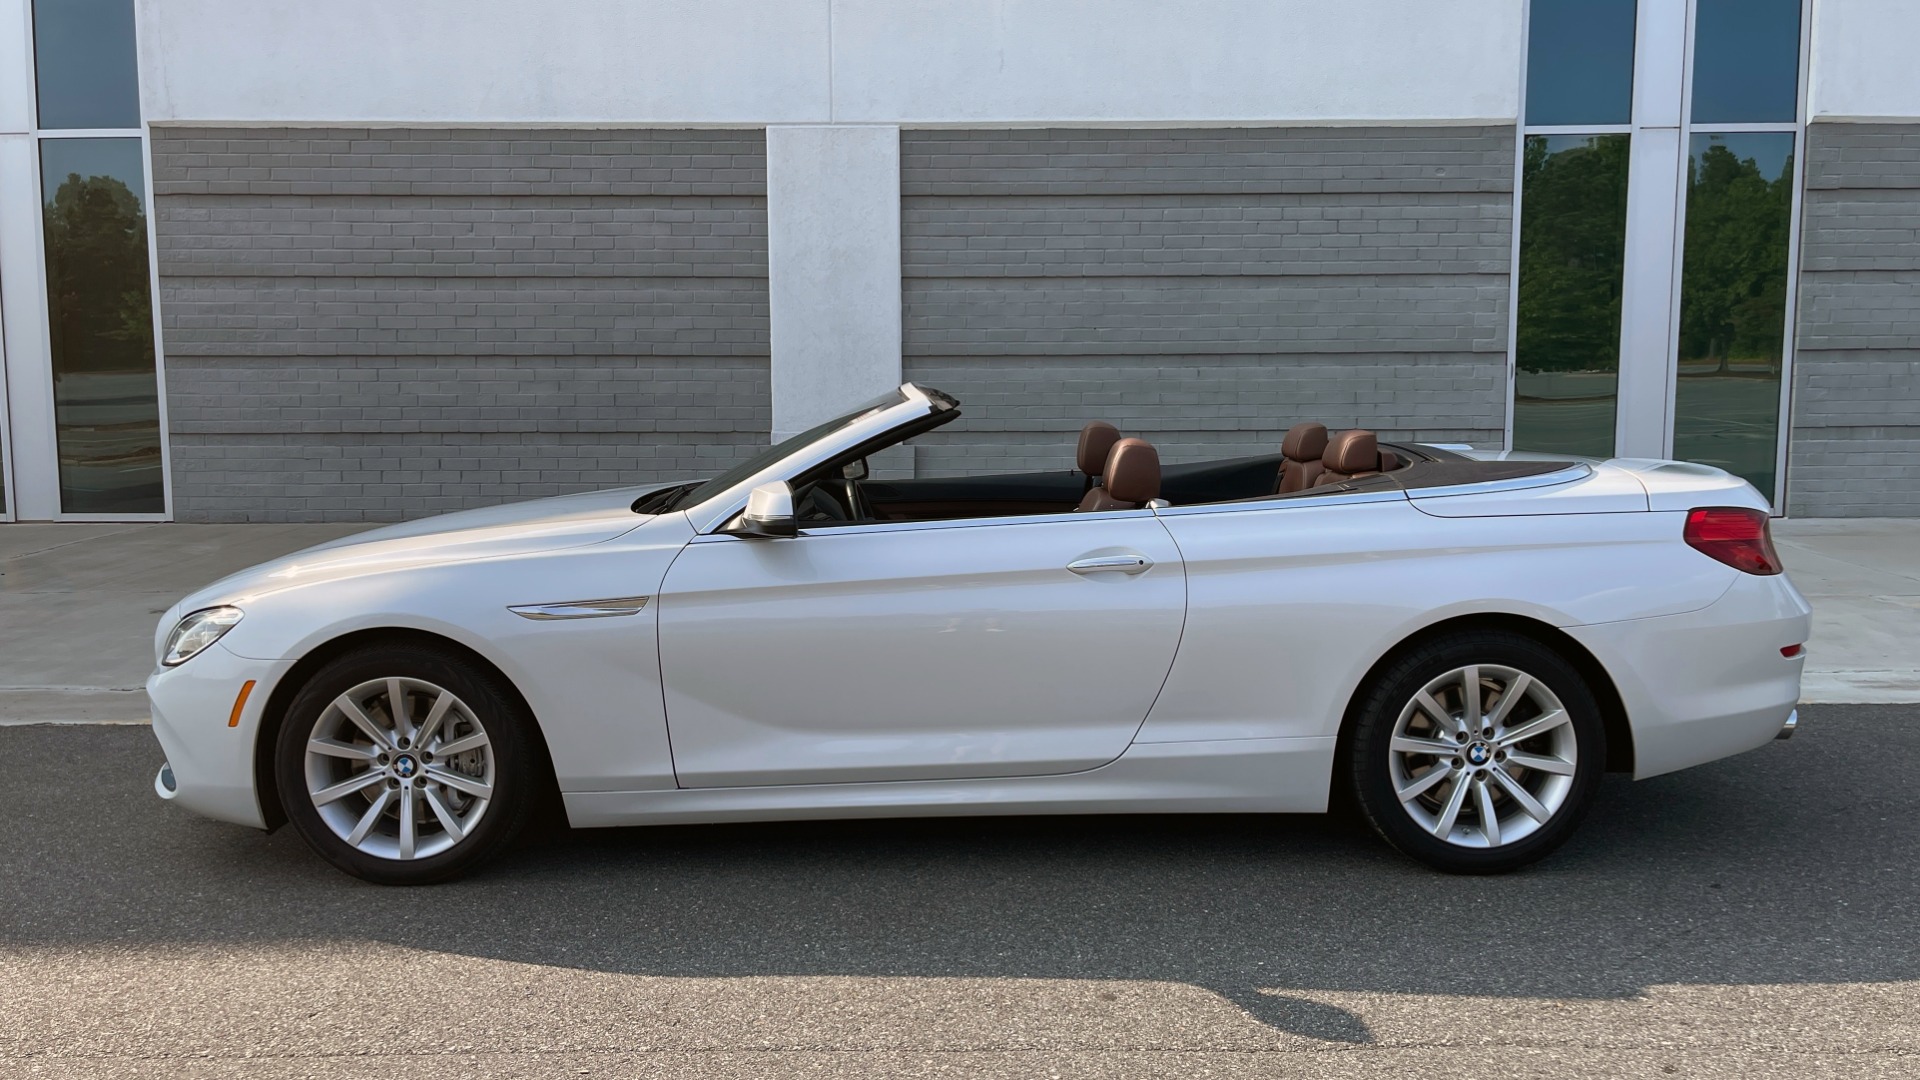 Used 2016 BMW 6 SERIES 640I CONVERTIBLE / 3.0L I6 / 8-SPD AUTO / RWD / NAV / REARVIEW for sale Sold at Formula Imports in Charlotte NC 28227 9